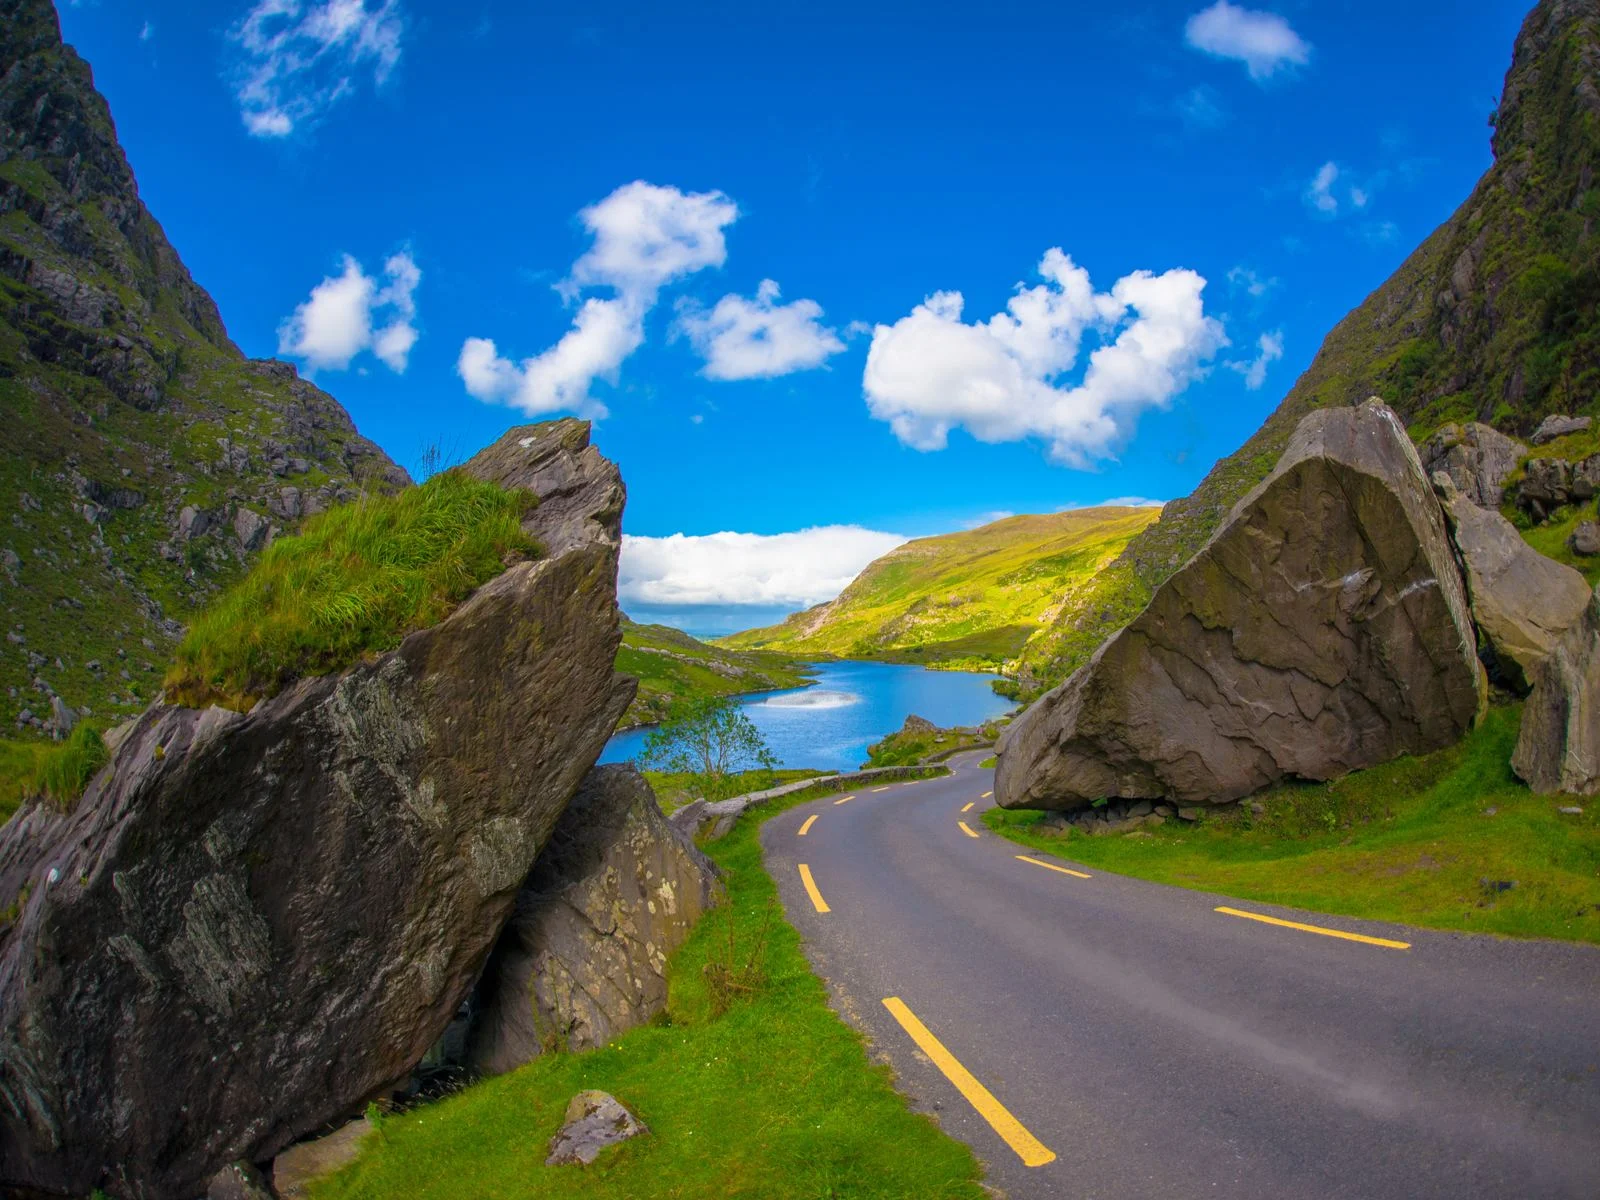 Huge boulders along a small road and a beautiful landscape at Gap of Dunloe Drive in Ring of Kerry, titled as one of the best places to visit in Ireland